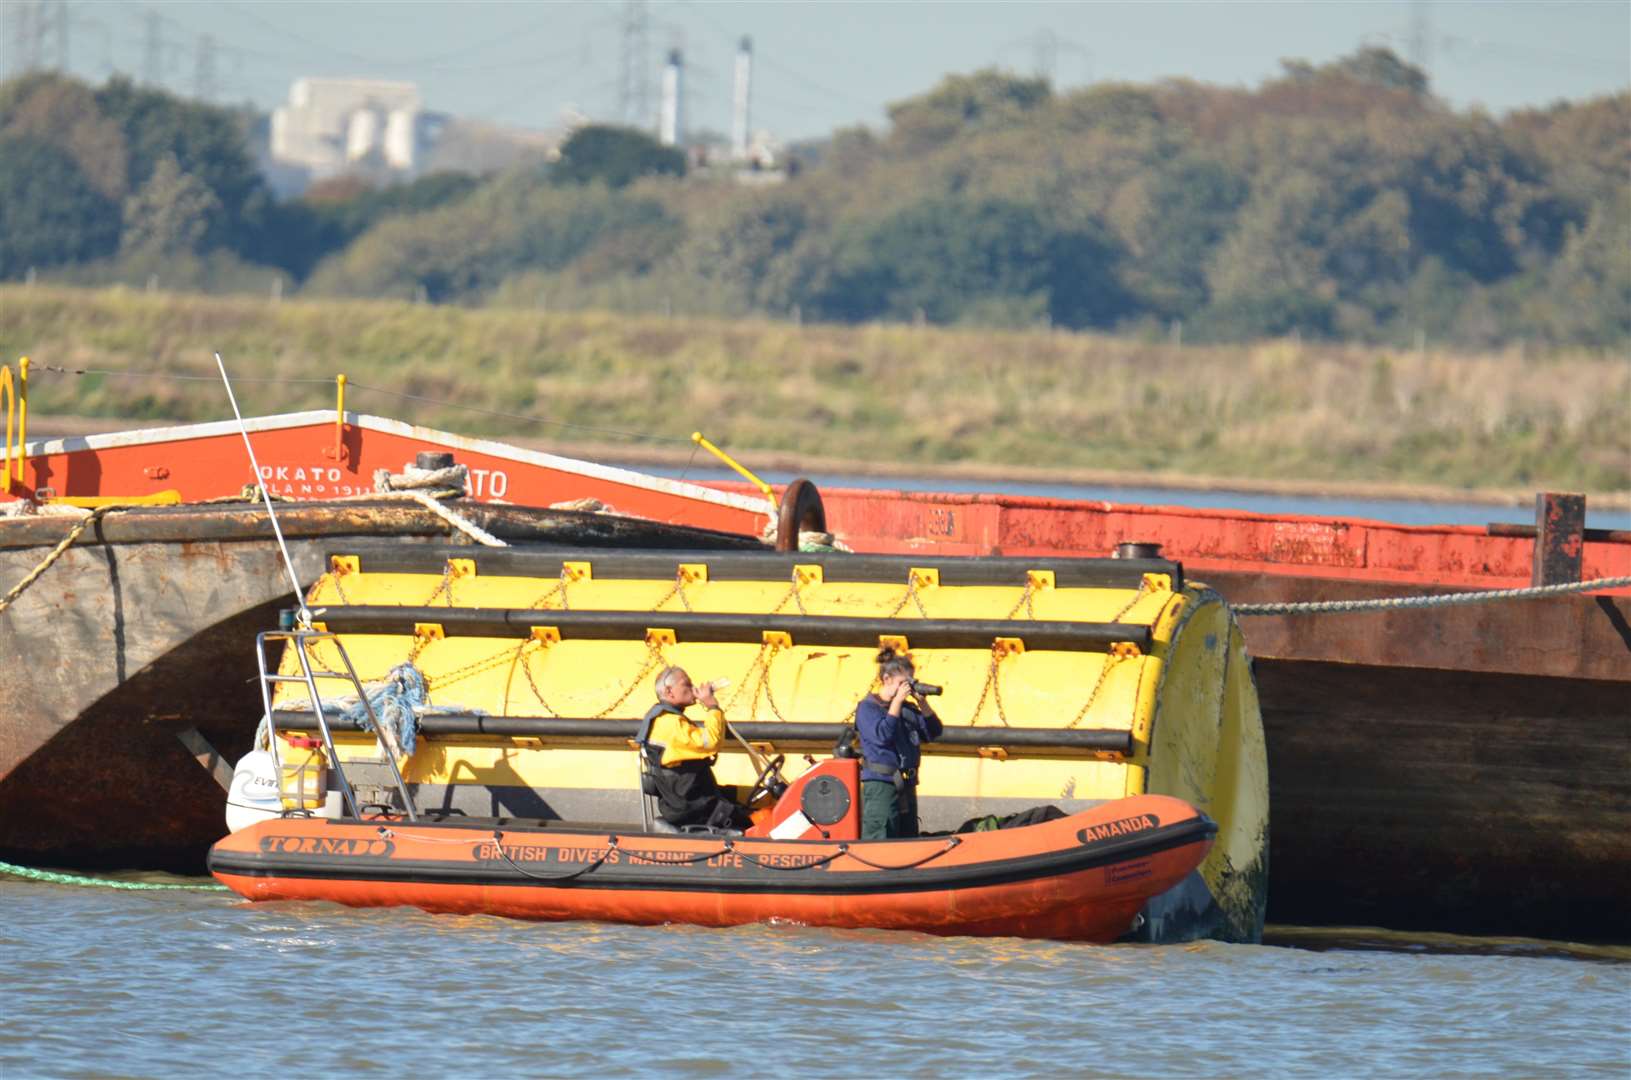 The British Divers Marine Life Rescue were pictured at the scene. Picture: Jason Arthur